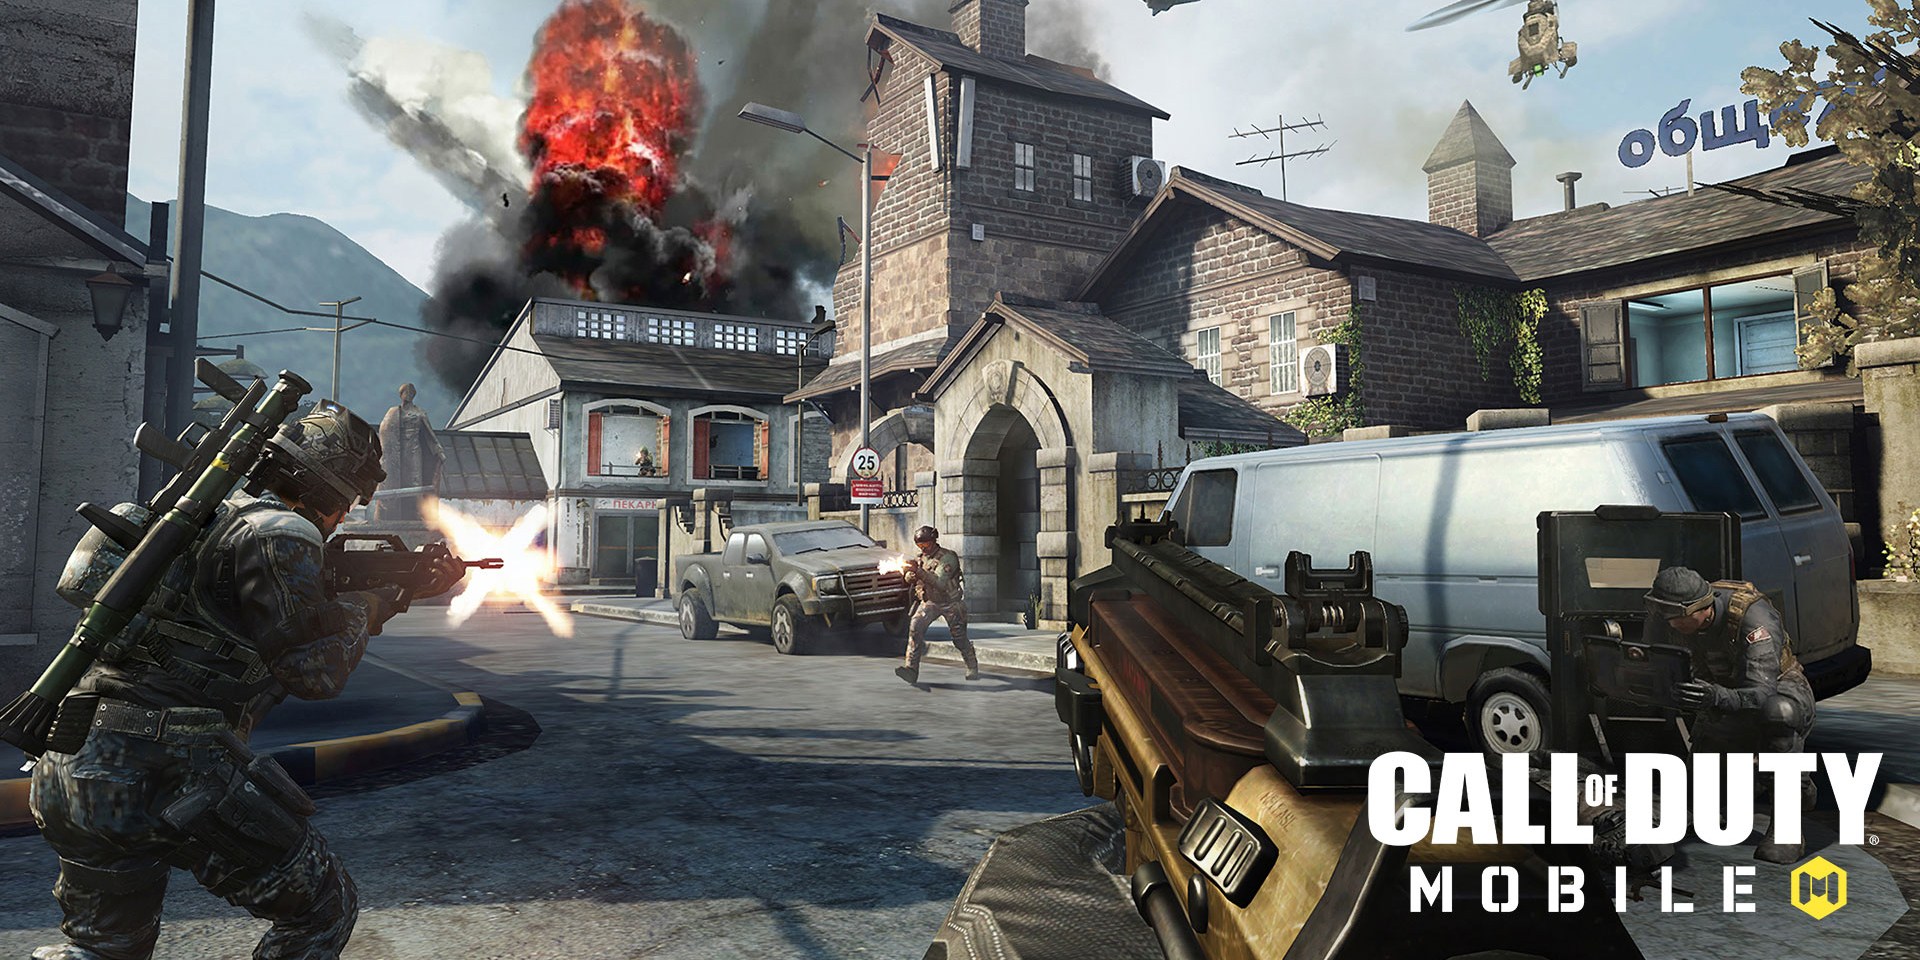 https://images.frandroid.com/wp-content/uploads/2019/05/call-of-duty-mobile-beta.jpg - 